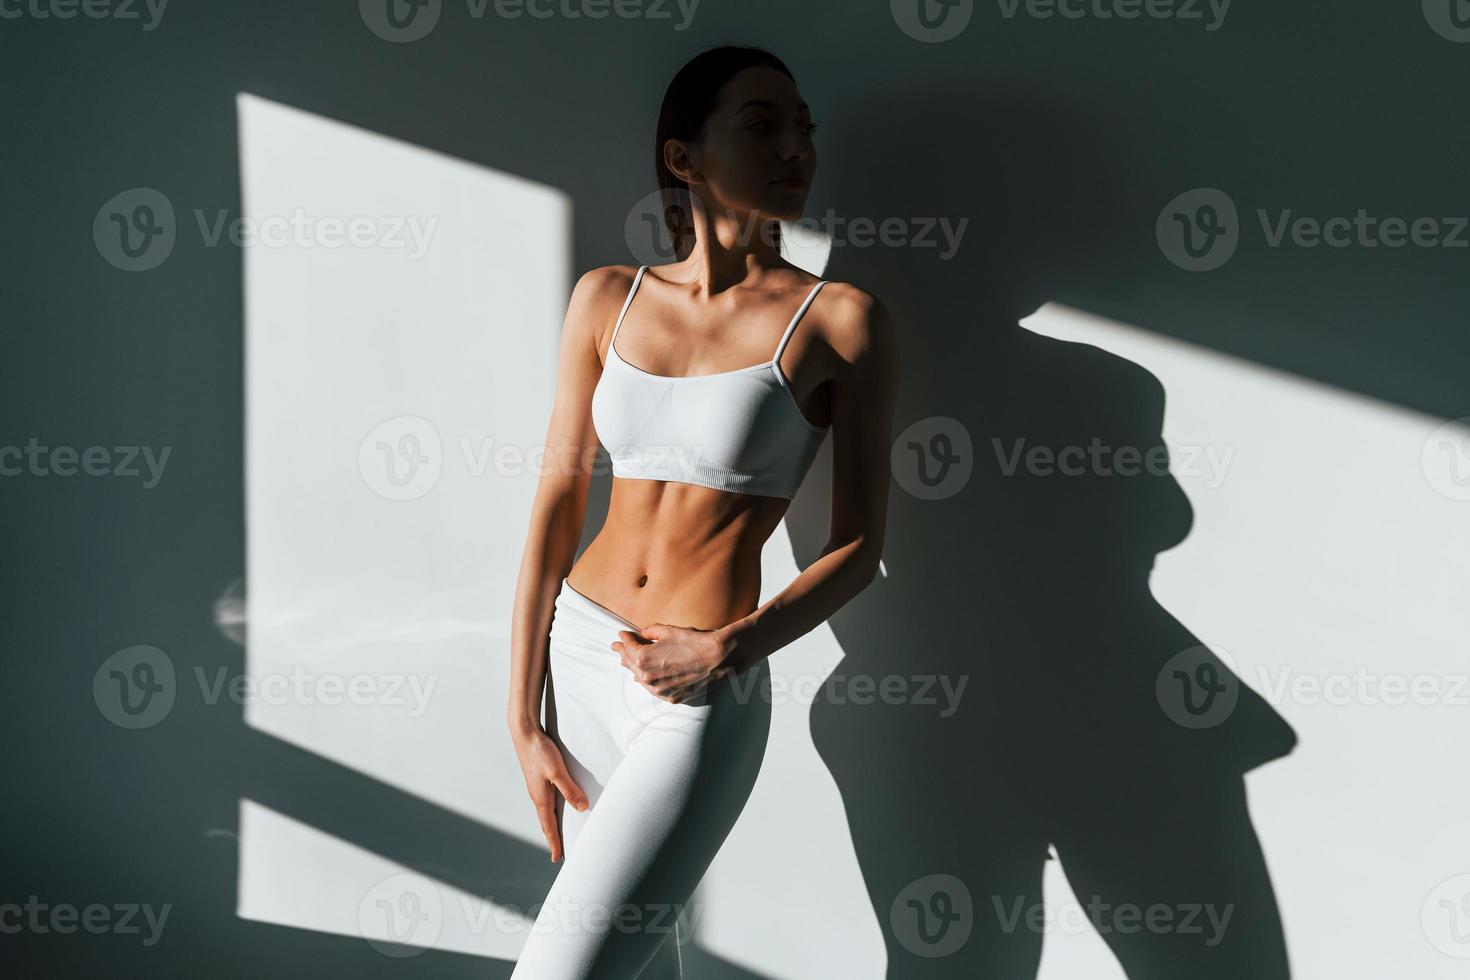 https://static.vecteezy.com/system/resources/previews/015/363/246/non_2x/beautiful-lighting-young-caucasian-woman-with-slim-body-shape-is-indoors-at-daytime-photo.jpg